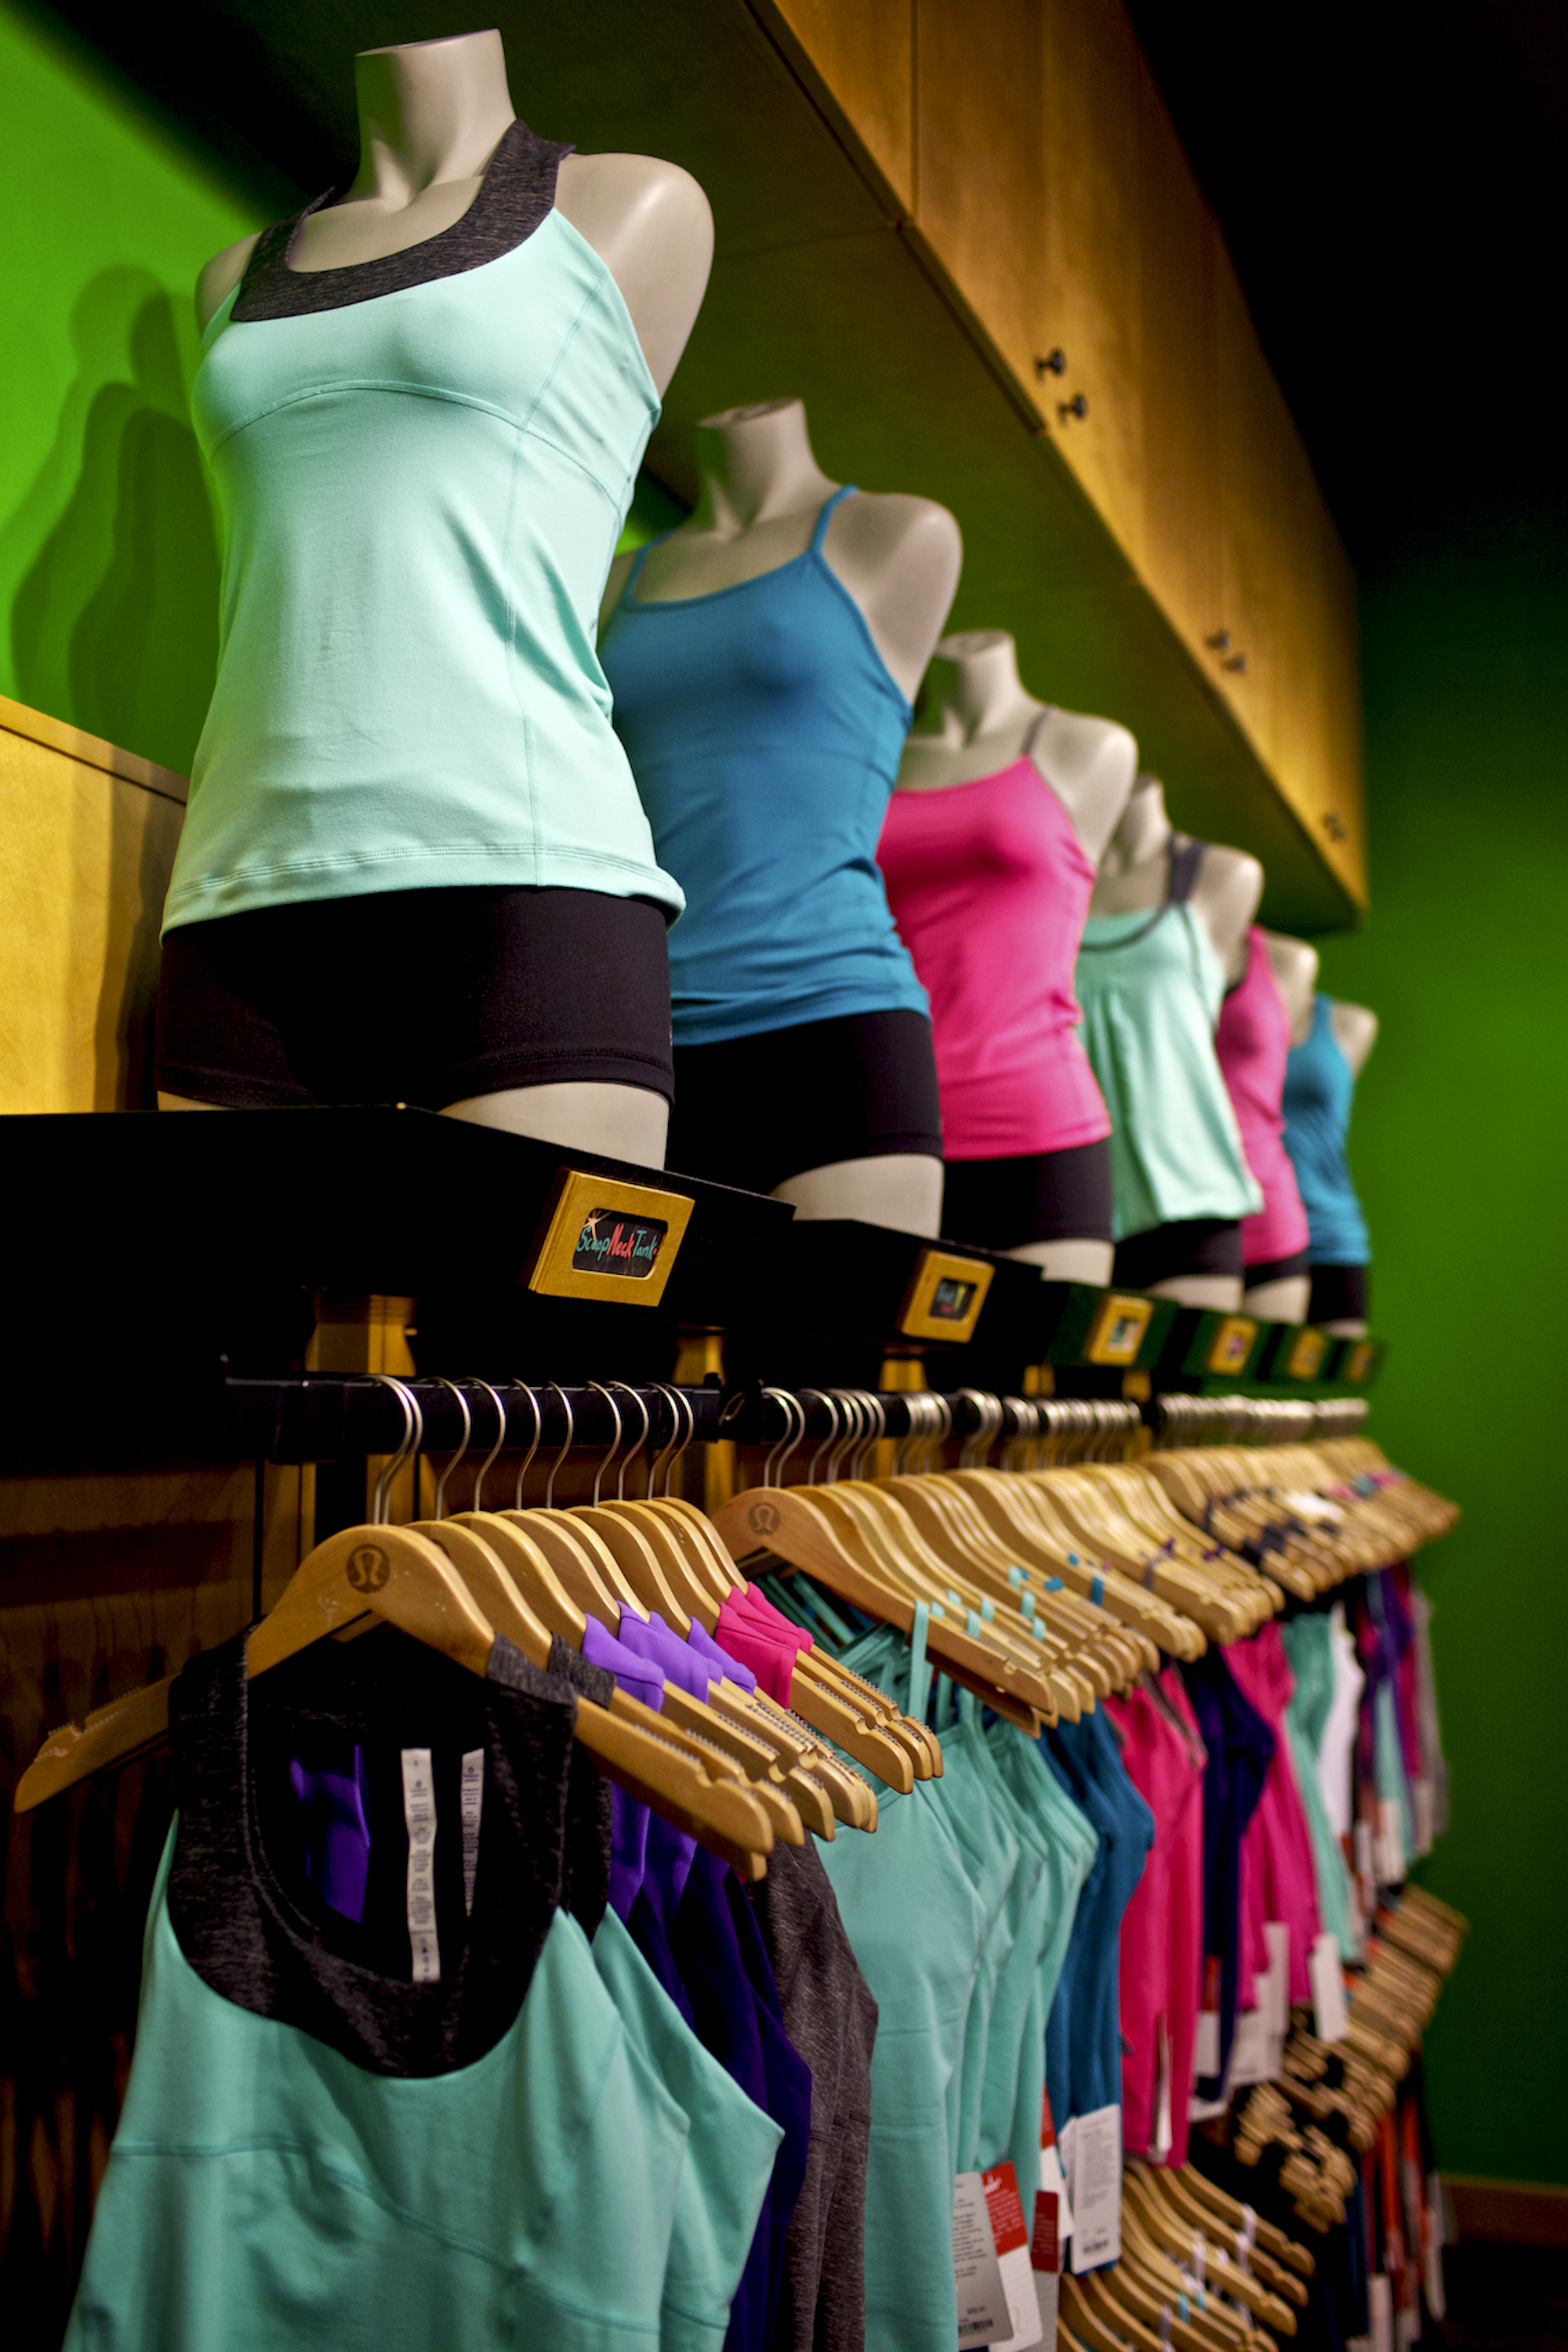 Lululemon Learns 'Discipline' From Recession Lesson - Bloomberg